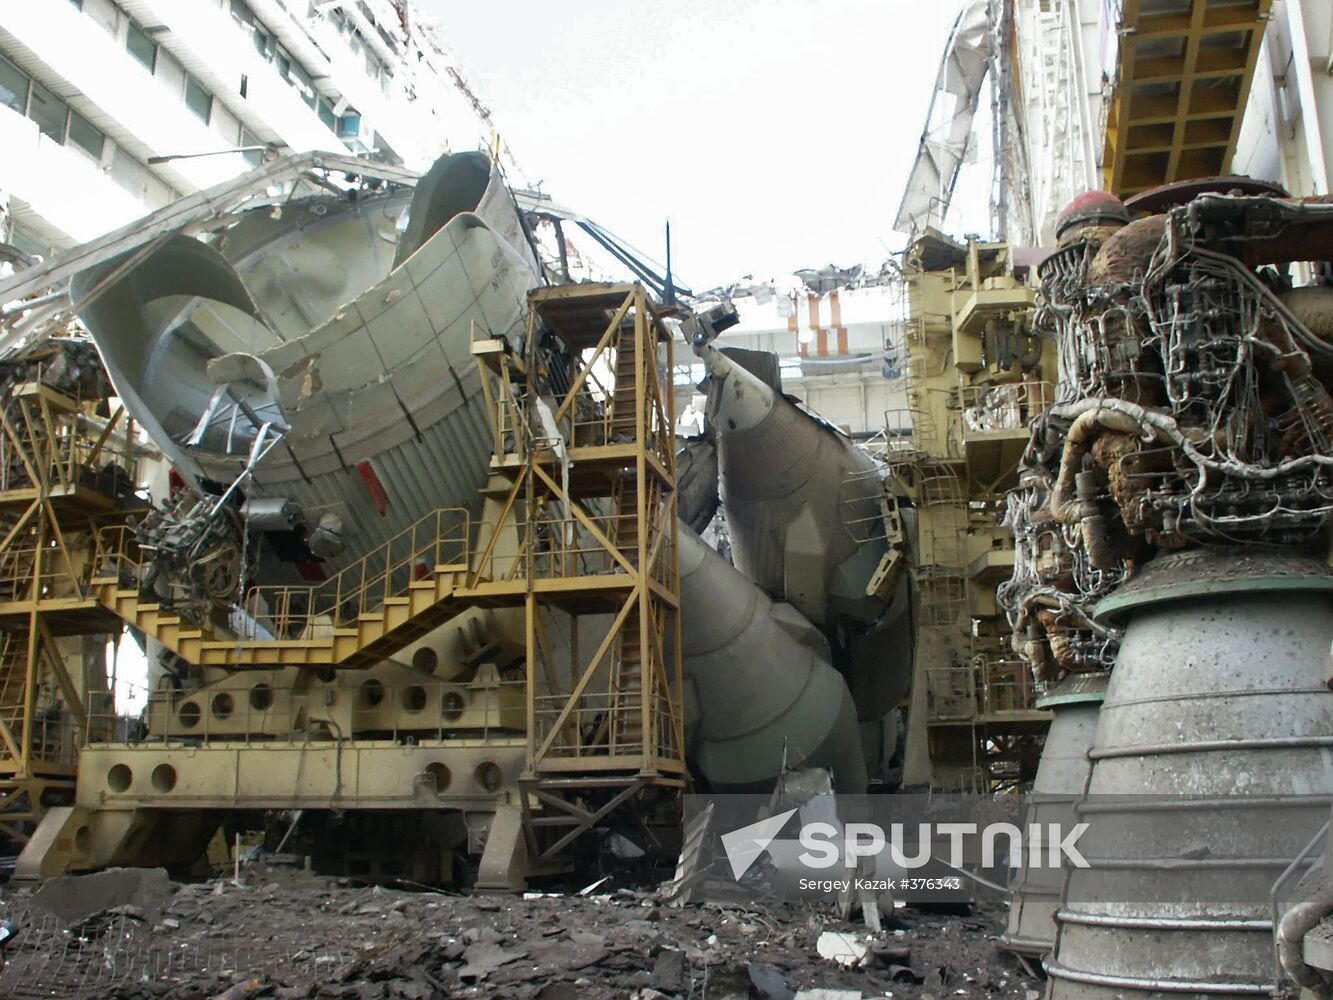 Accident at Baikonur space center